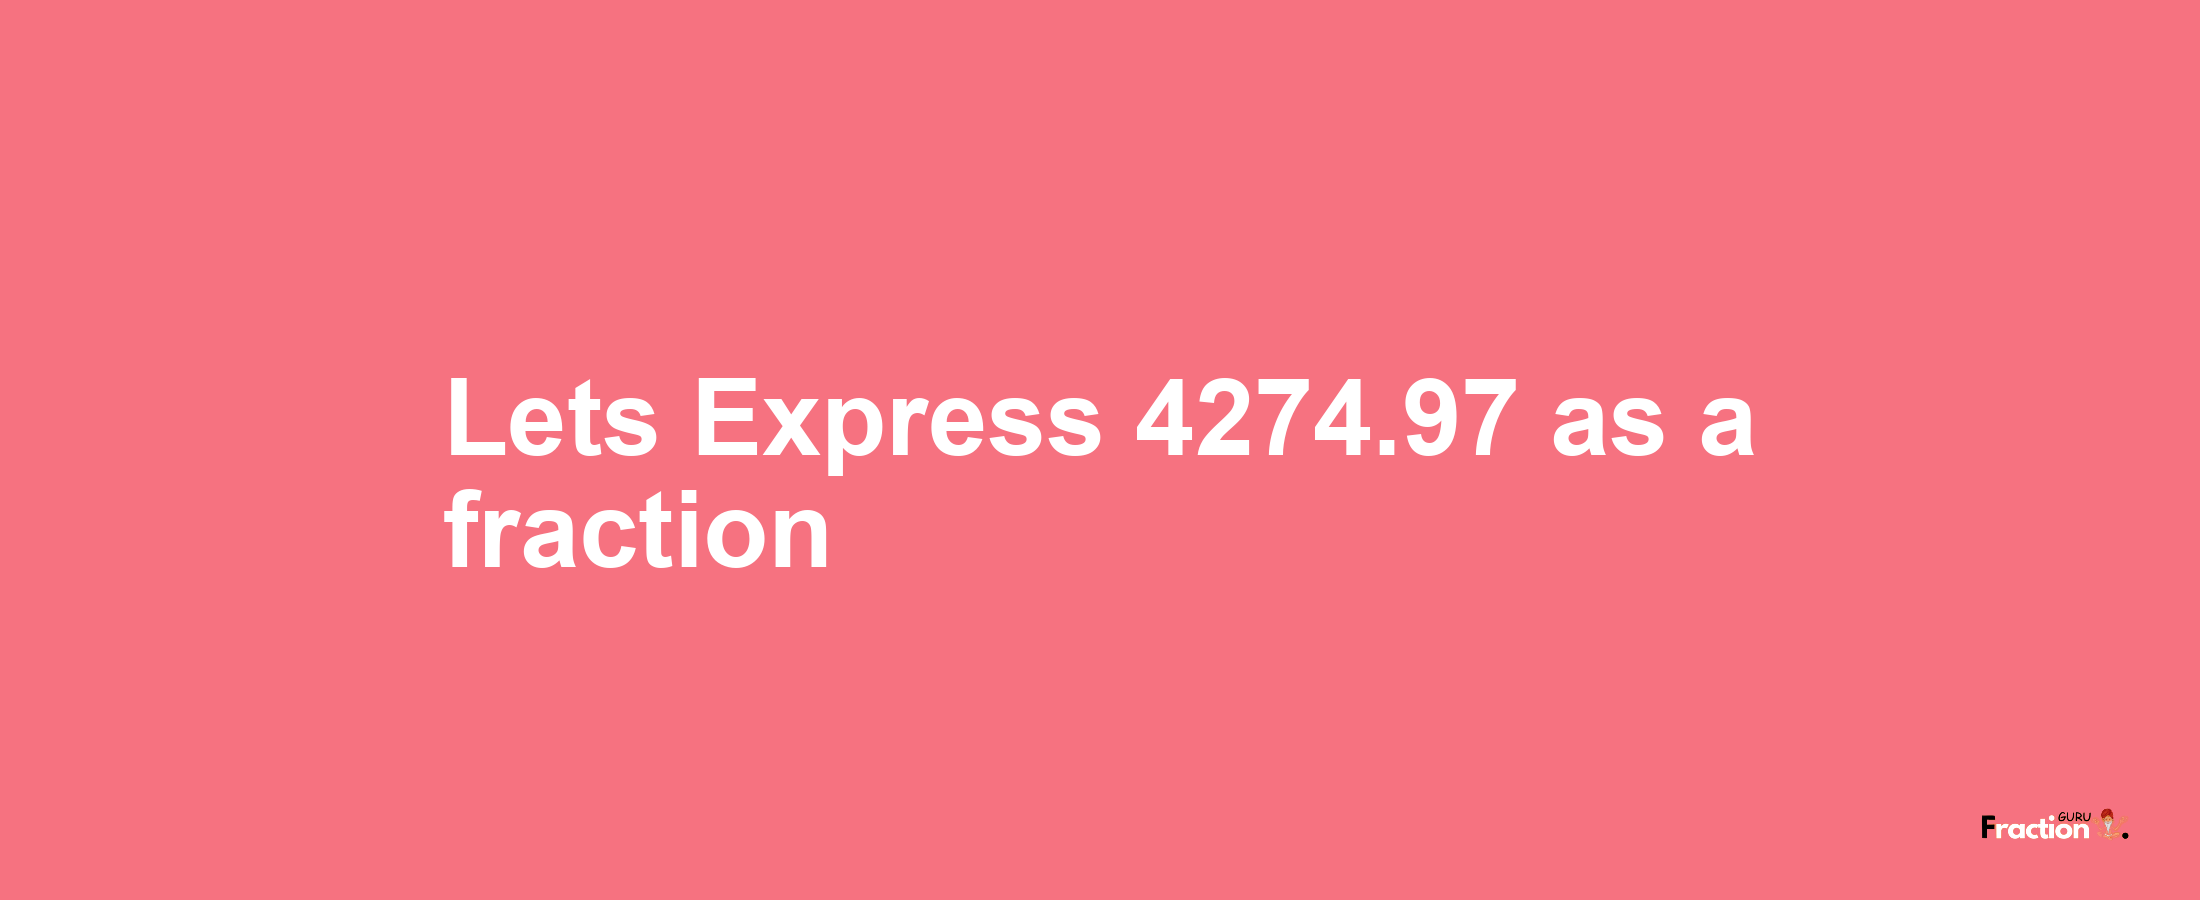 Lets Express 4274.97 as afraction